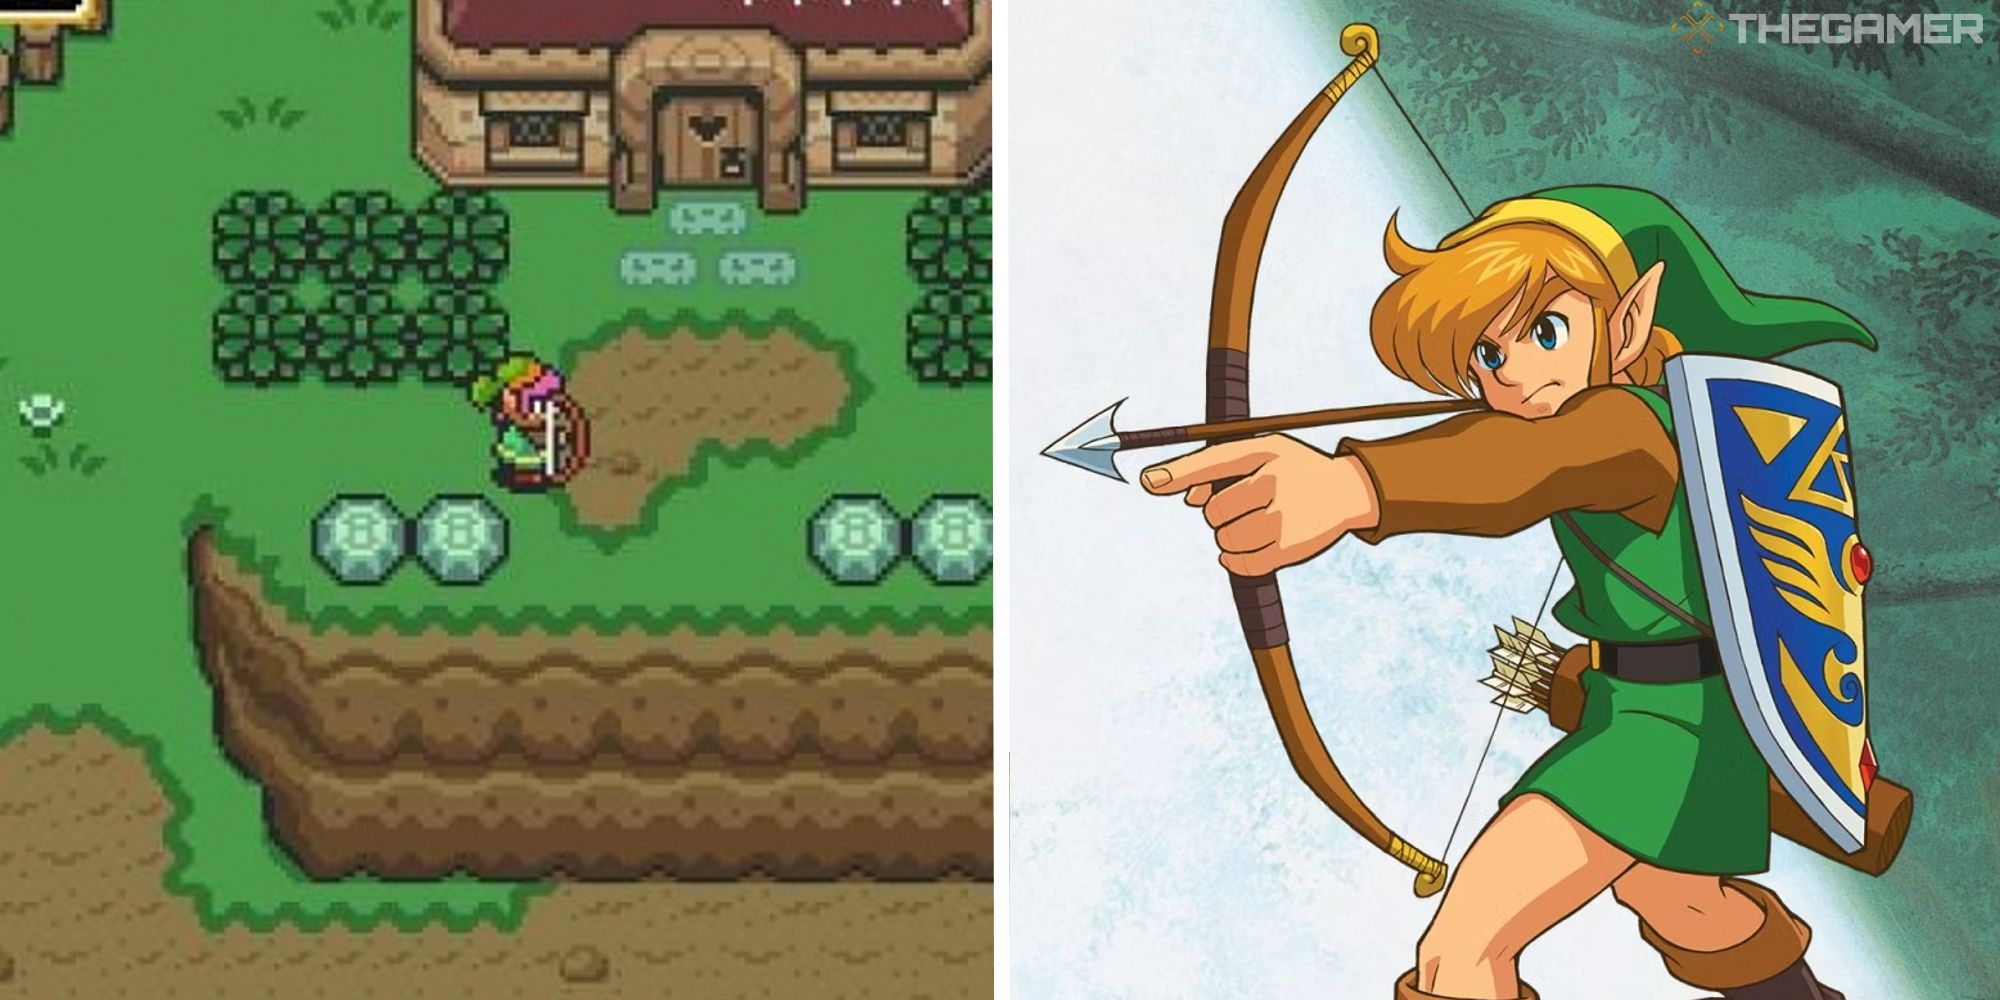 image of link sprite from link the past next to image of link from promotional cartoon